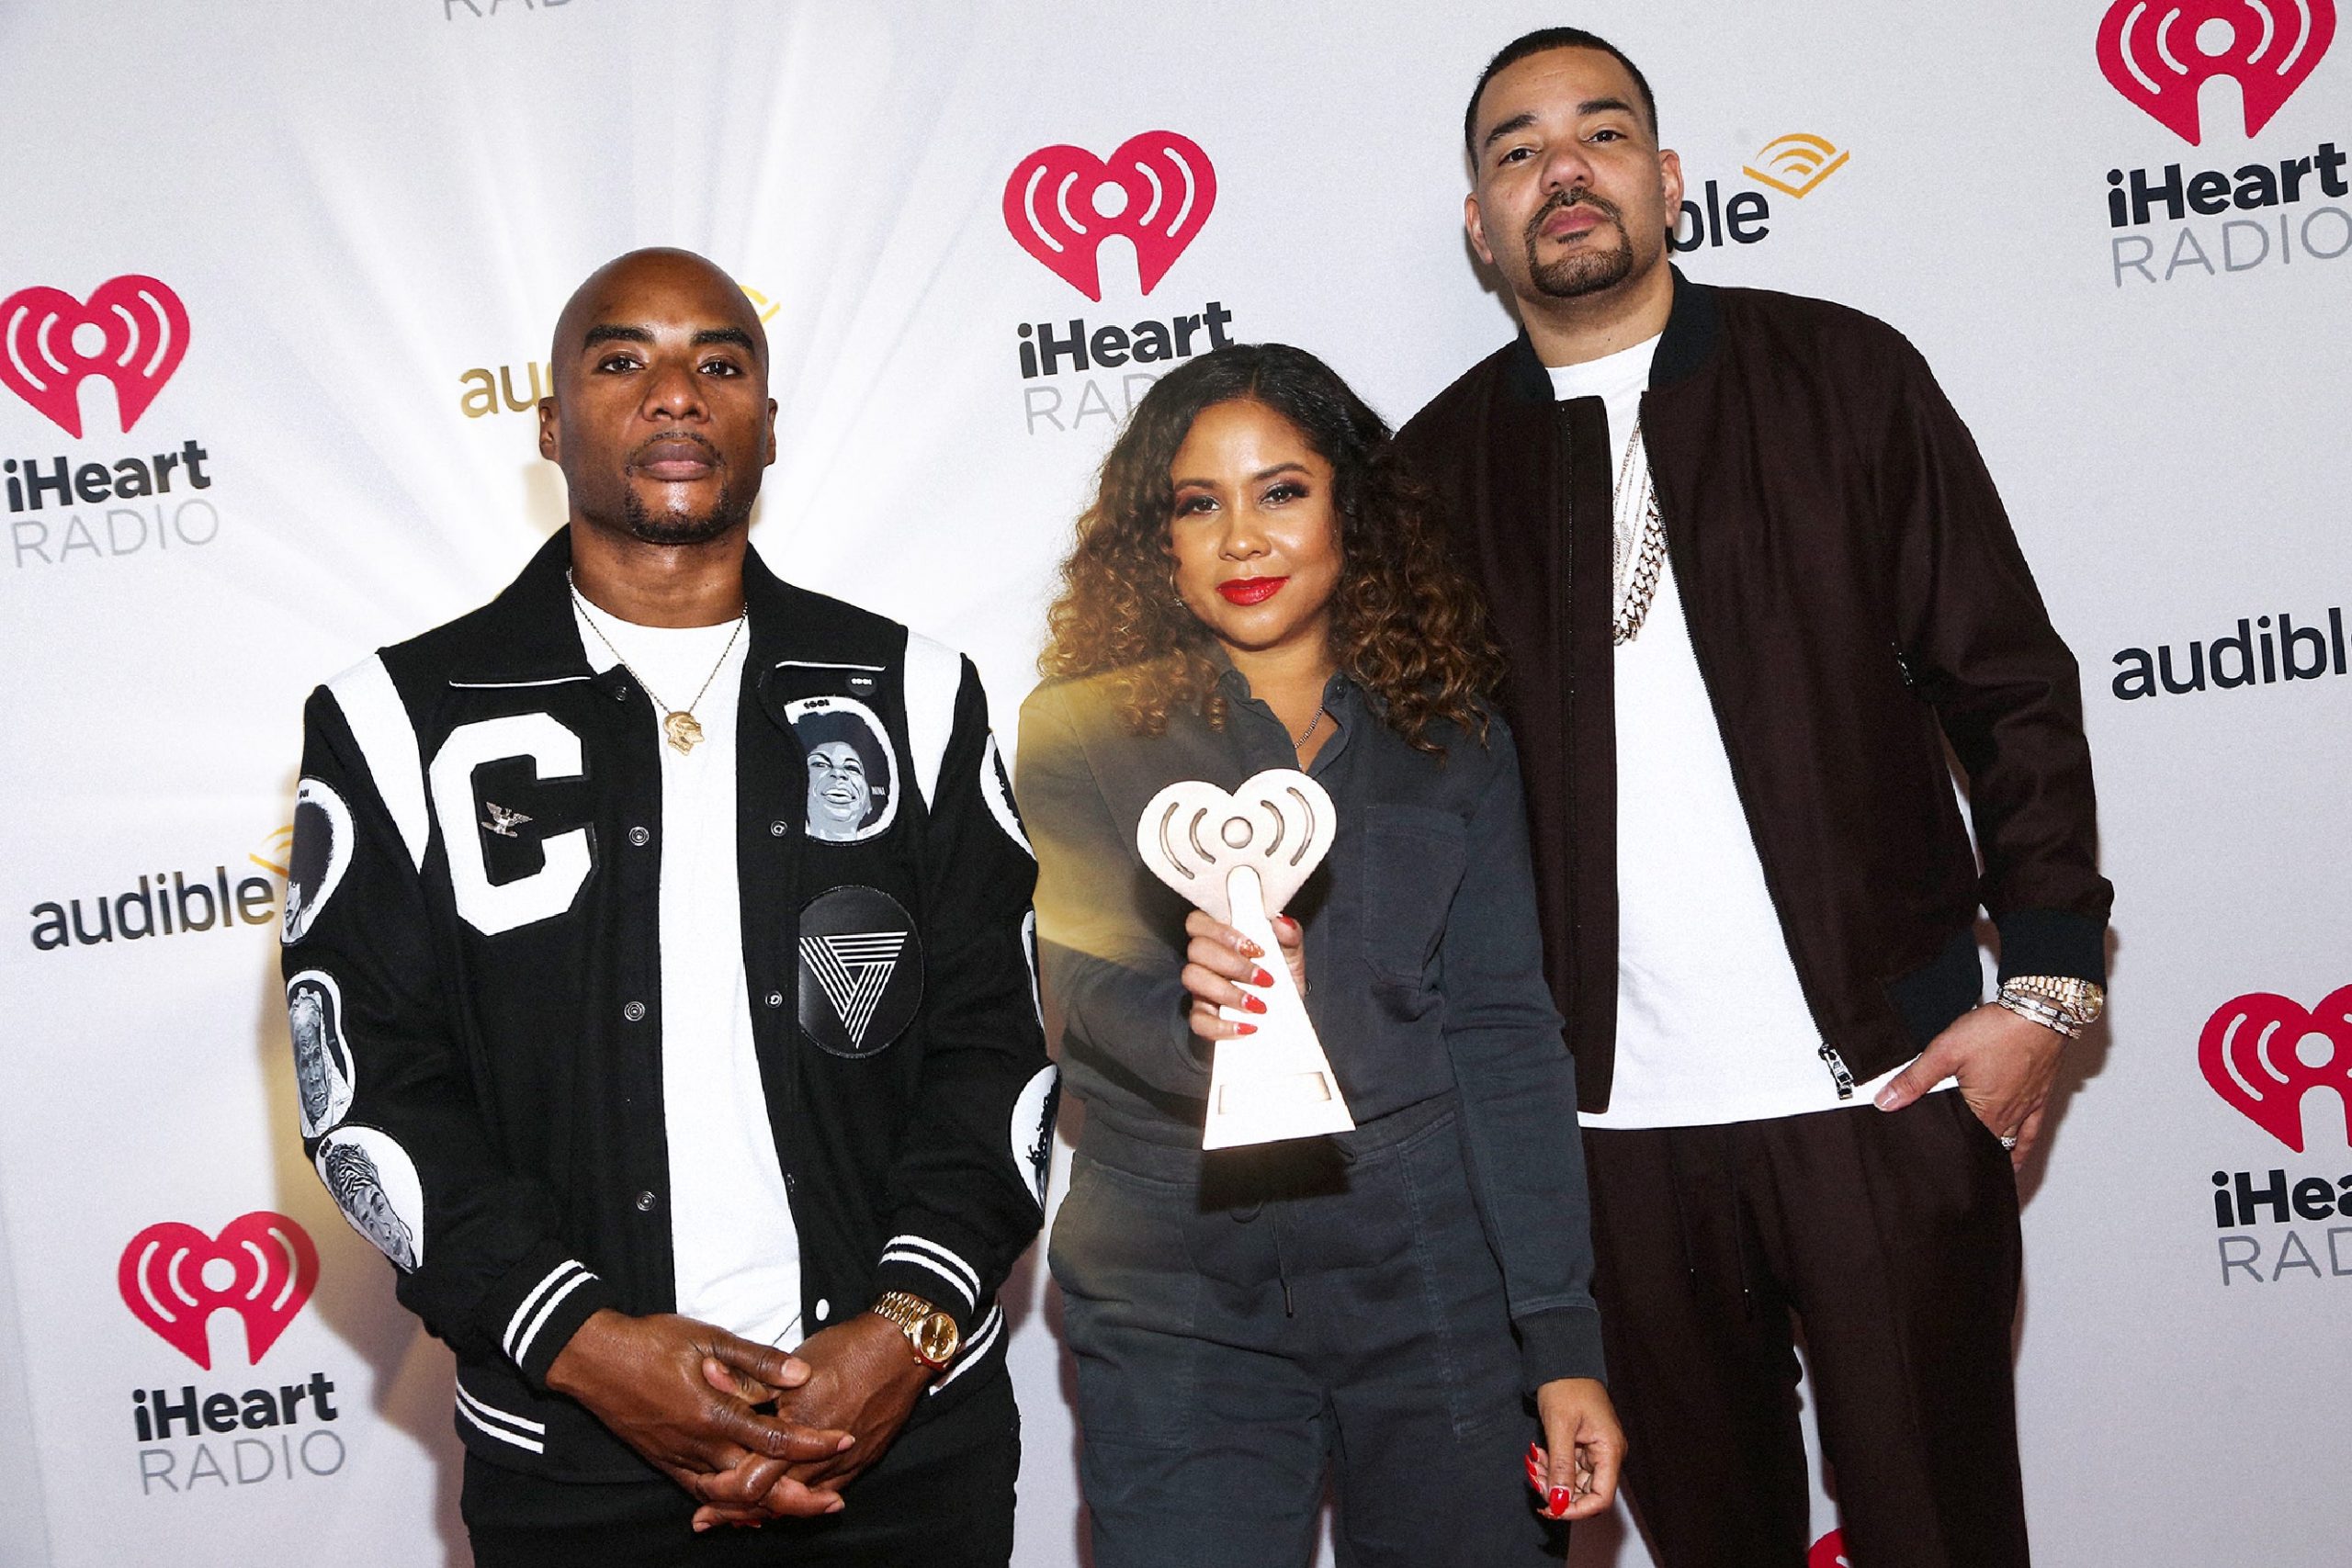 Charlamagne Tha God with a golden light radiating from behind him with Angela Yee and DJ Envy.